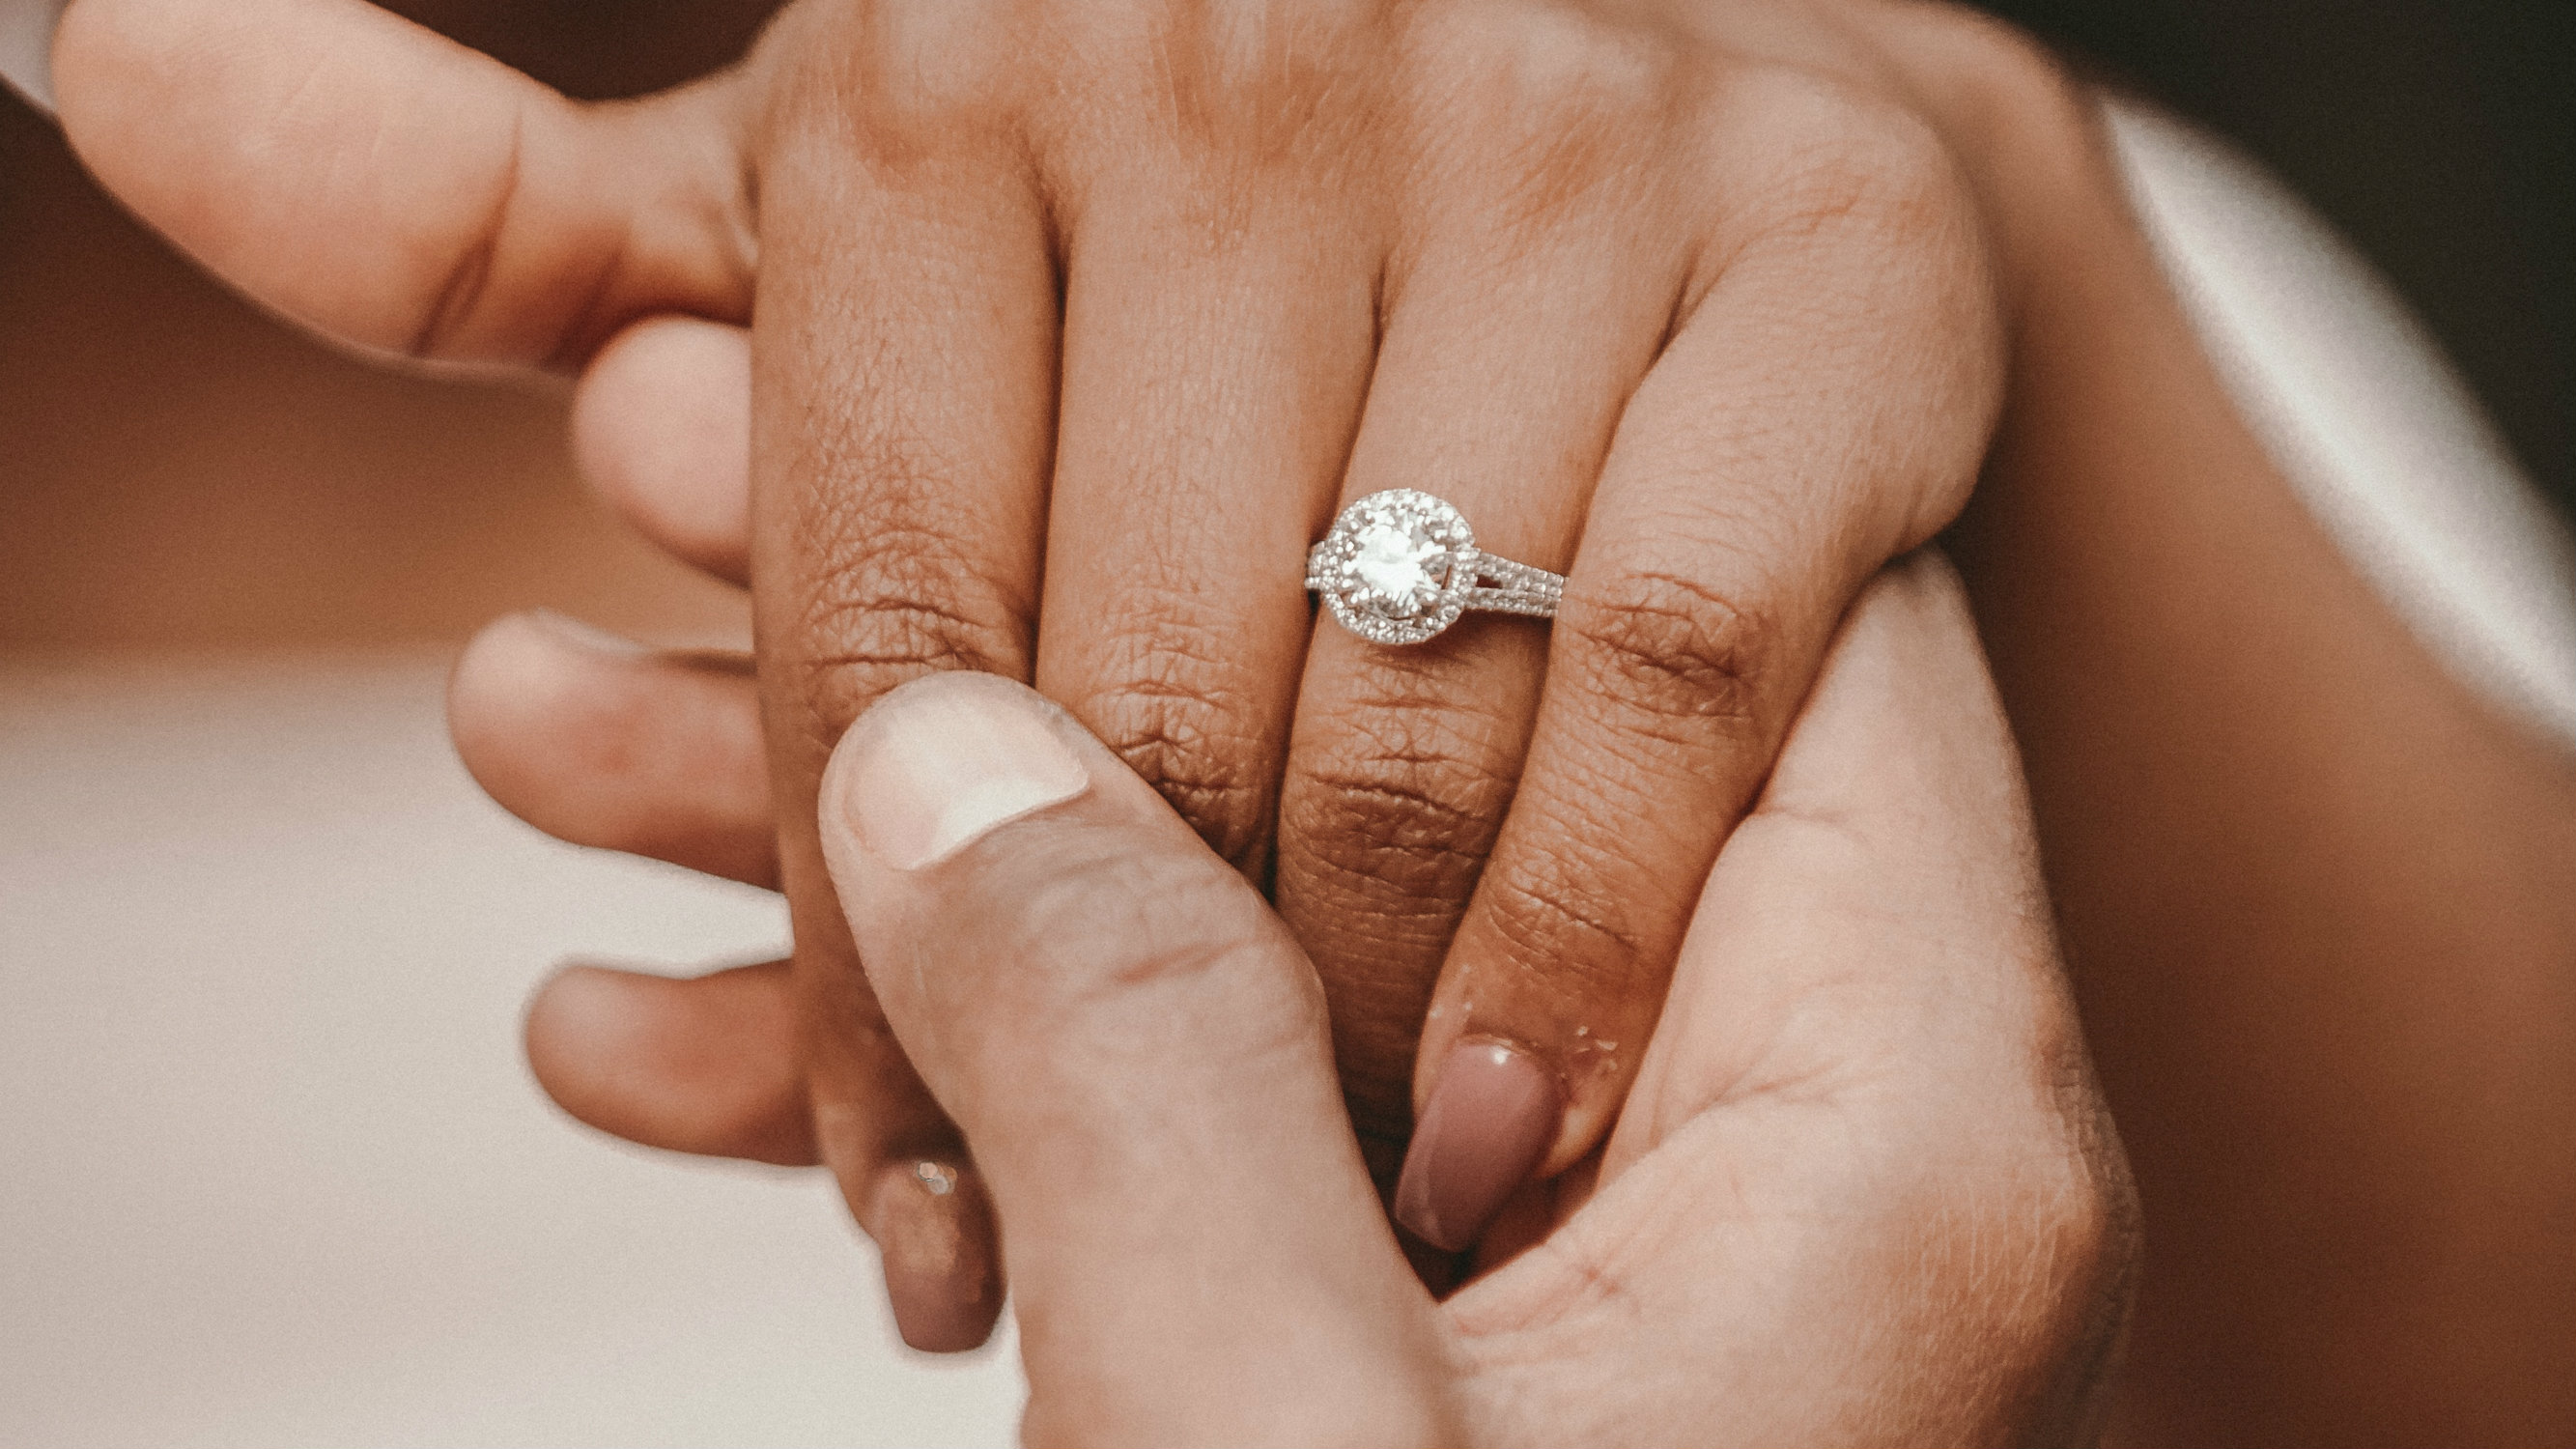 An Enduring Commitment, Wedding Ring or Not - The New York Times